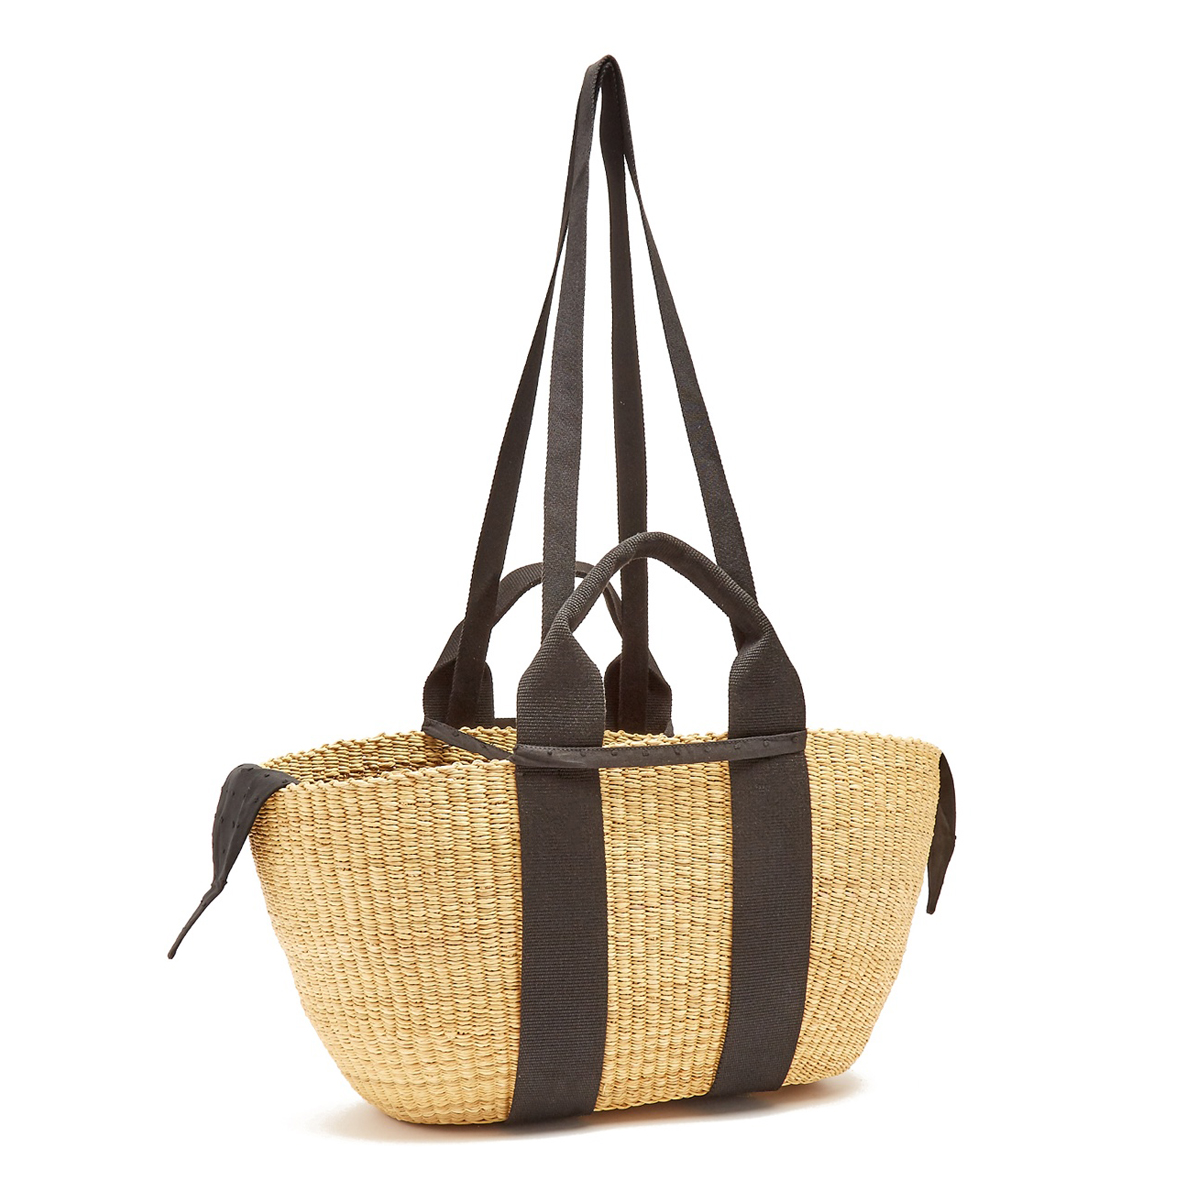 George woven-straw tote